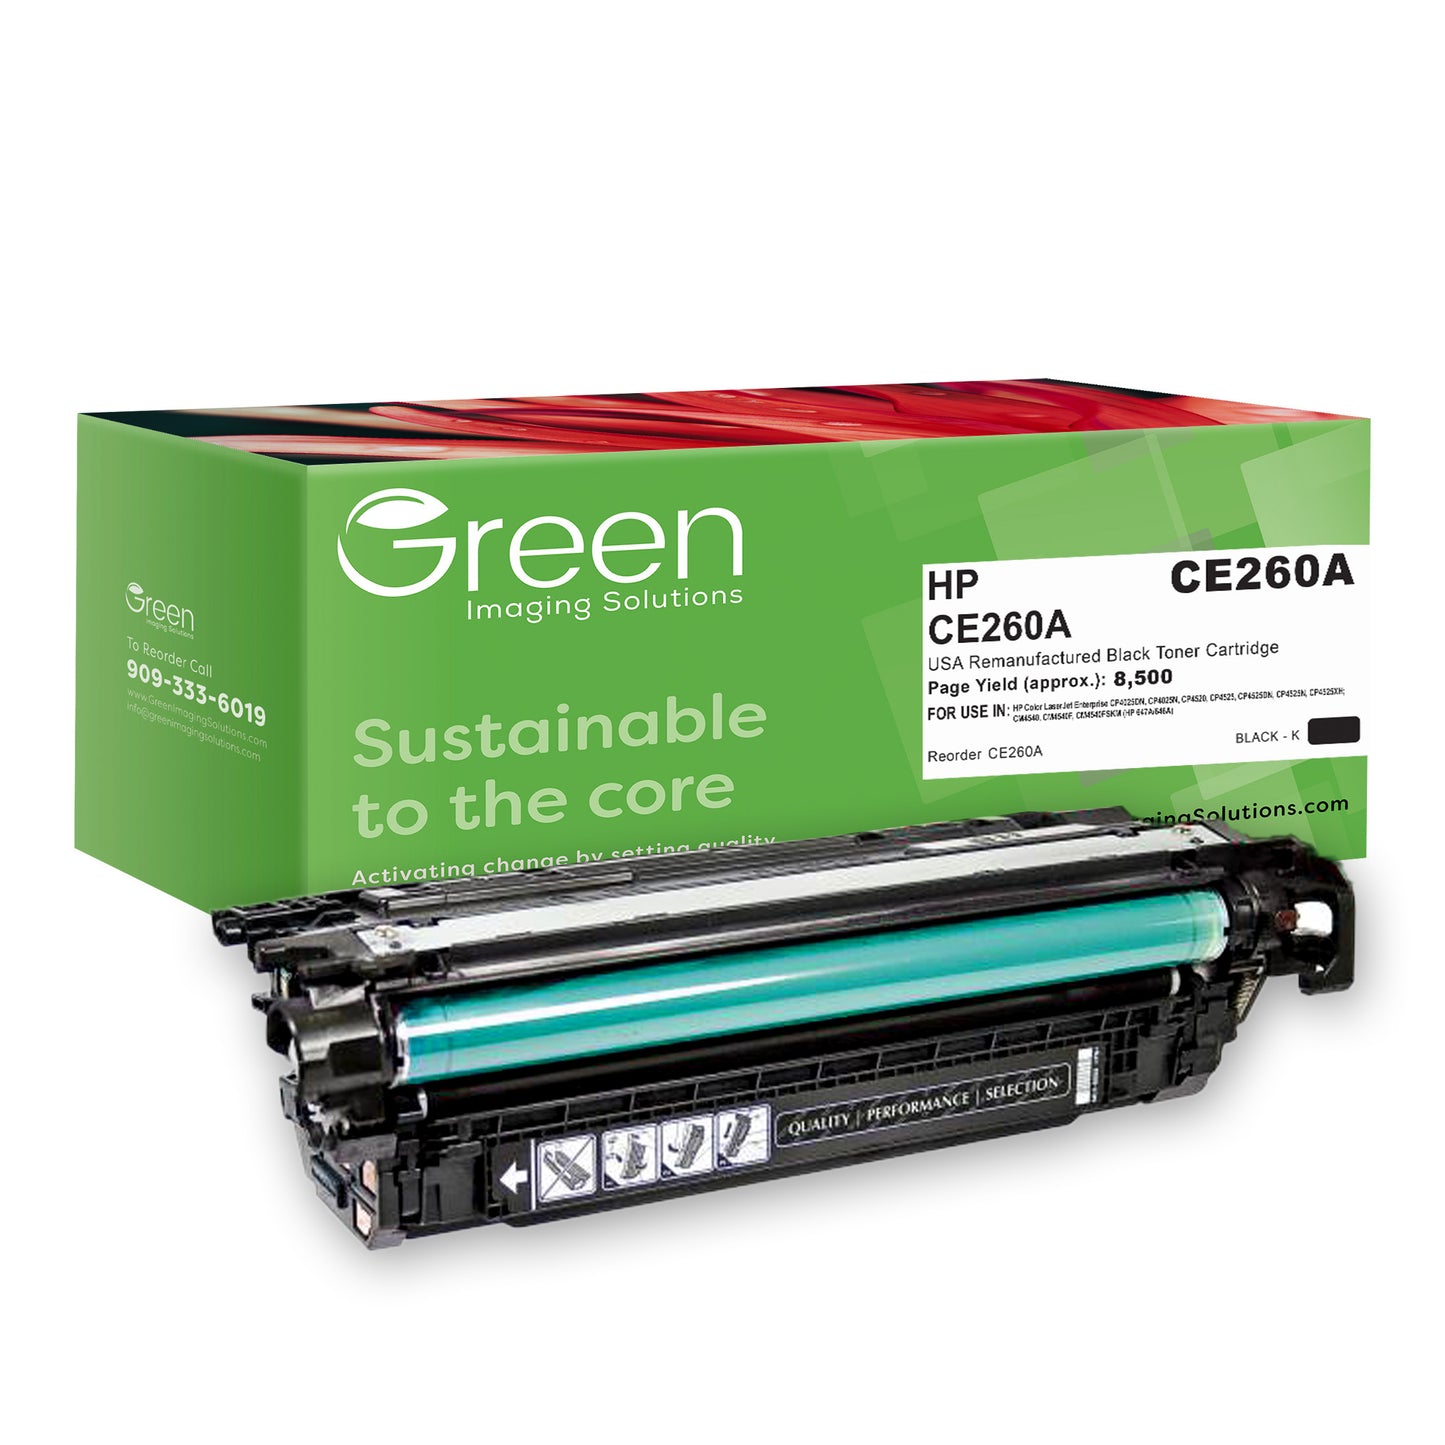 GIS USA Remanufactured Black Toner Cartridge for HP CE260A (HP 647A/646A)